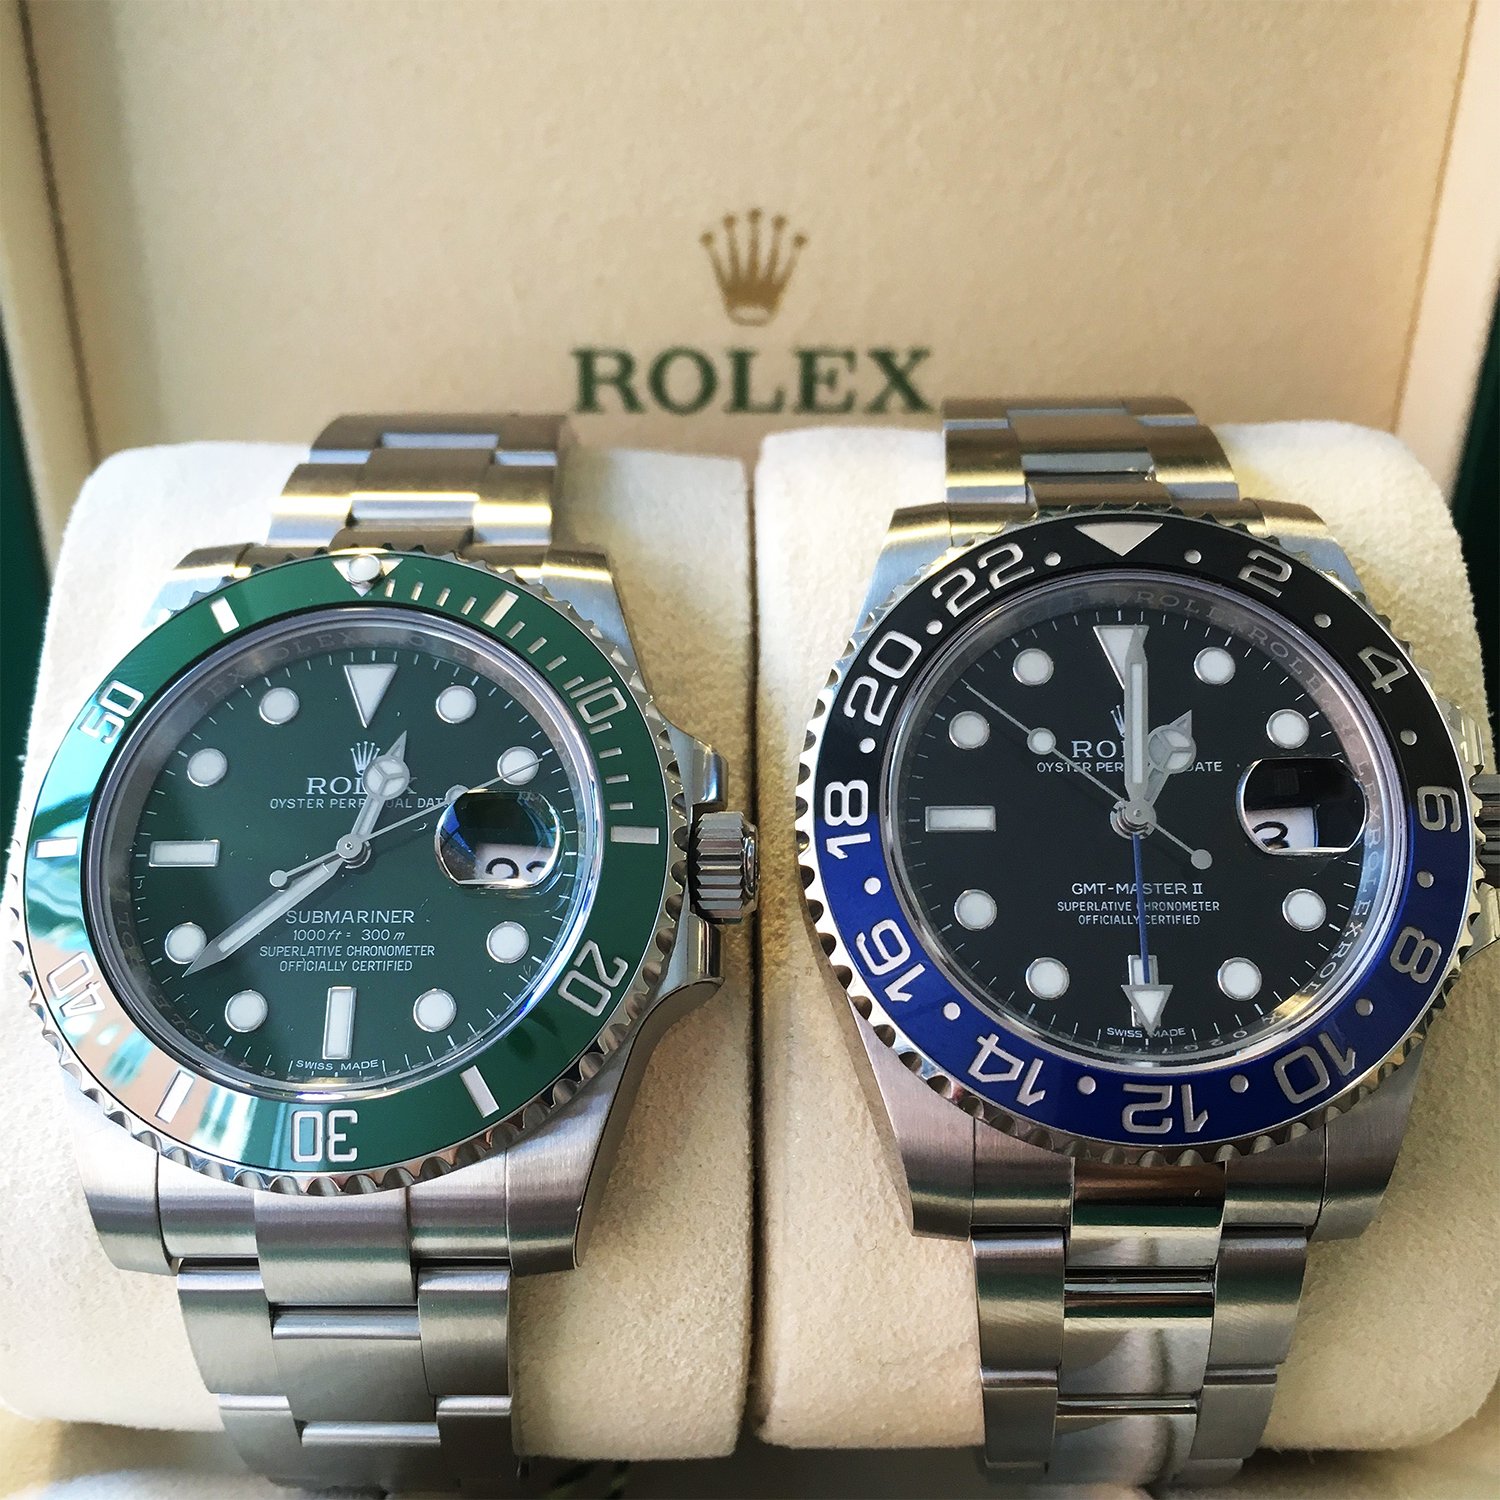 AuthenticWatches.com on X: Which would you choose? The Rolex